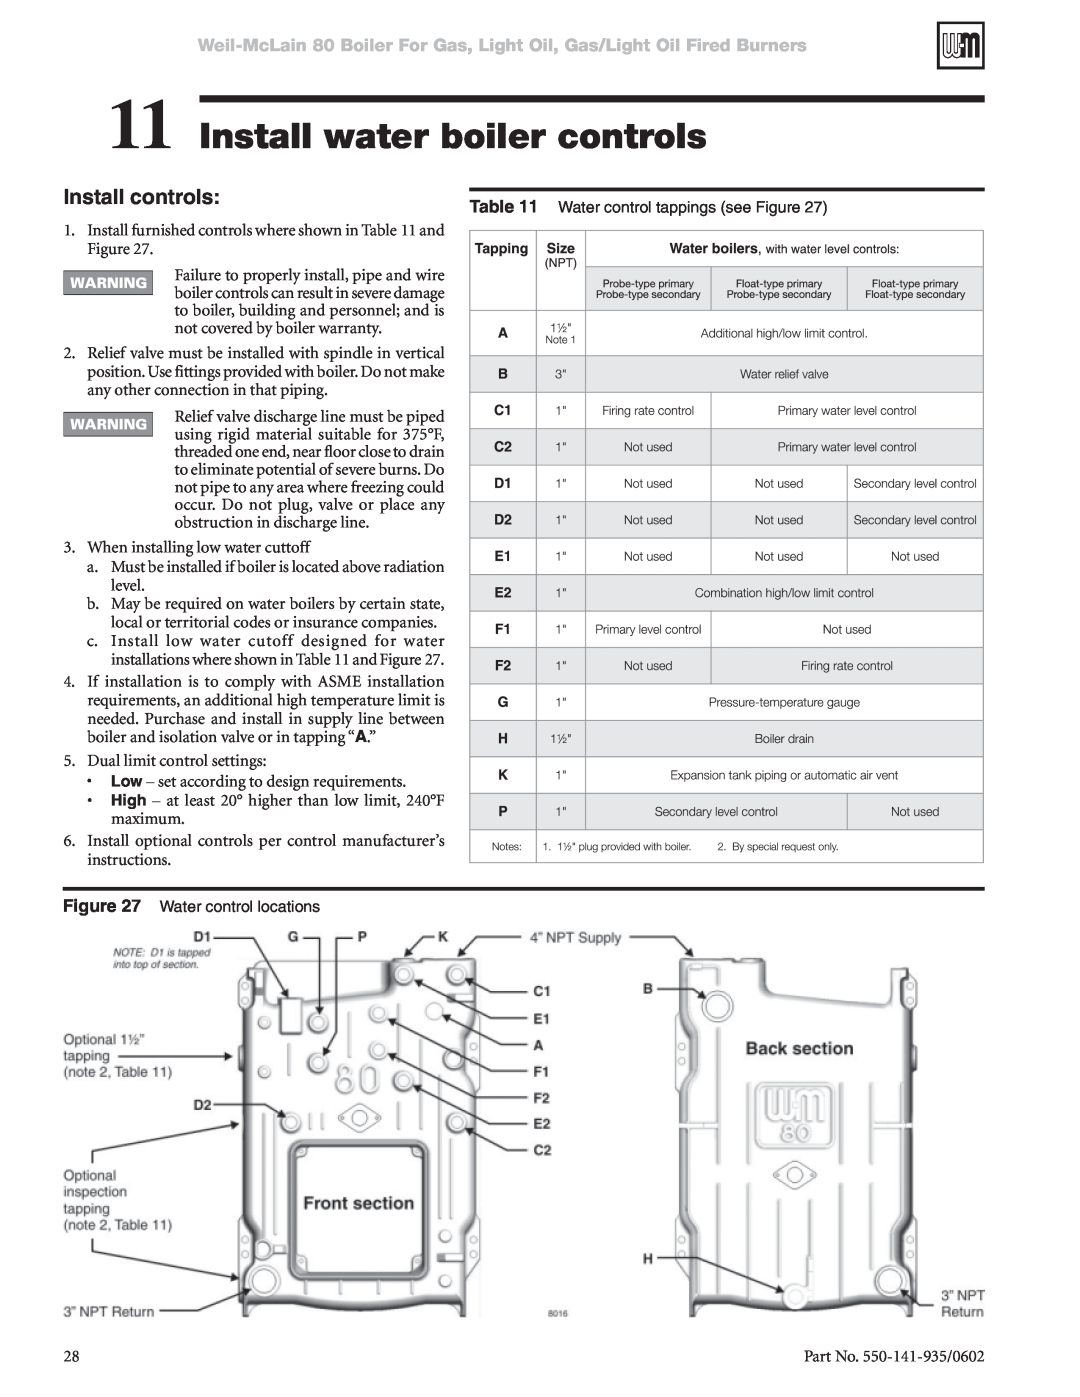 Weil-McLain 80 manual Install water boiler controls, Install controls 